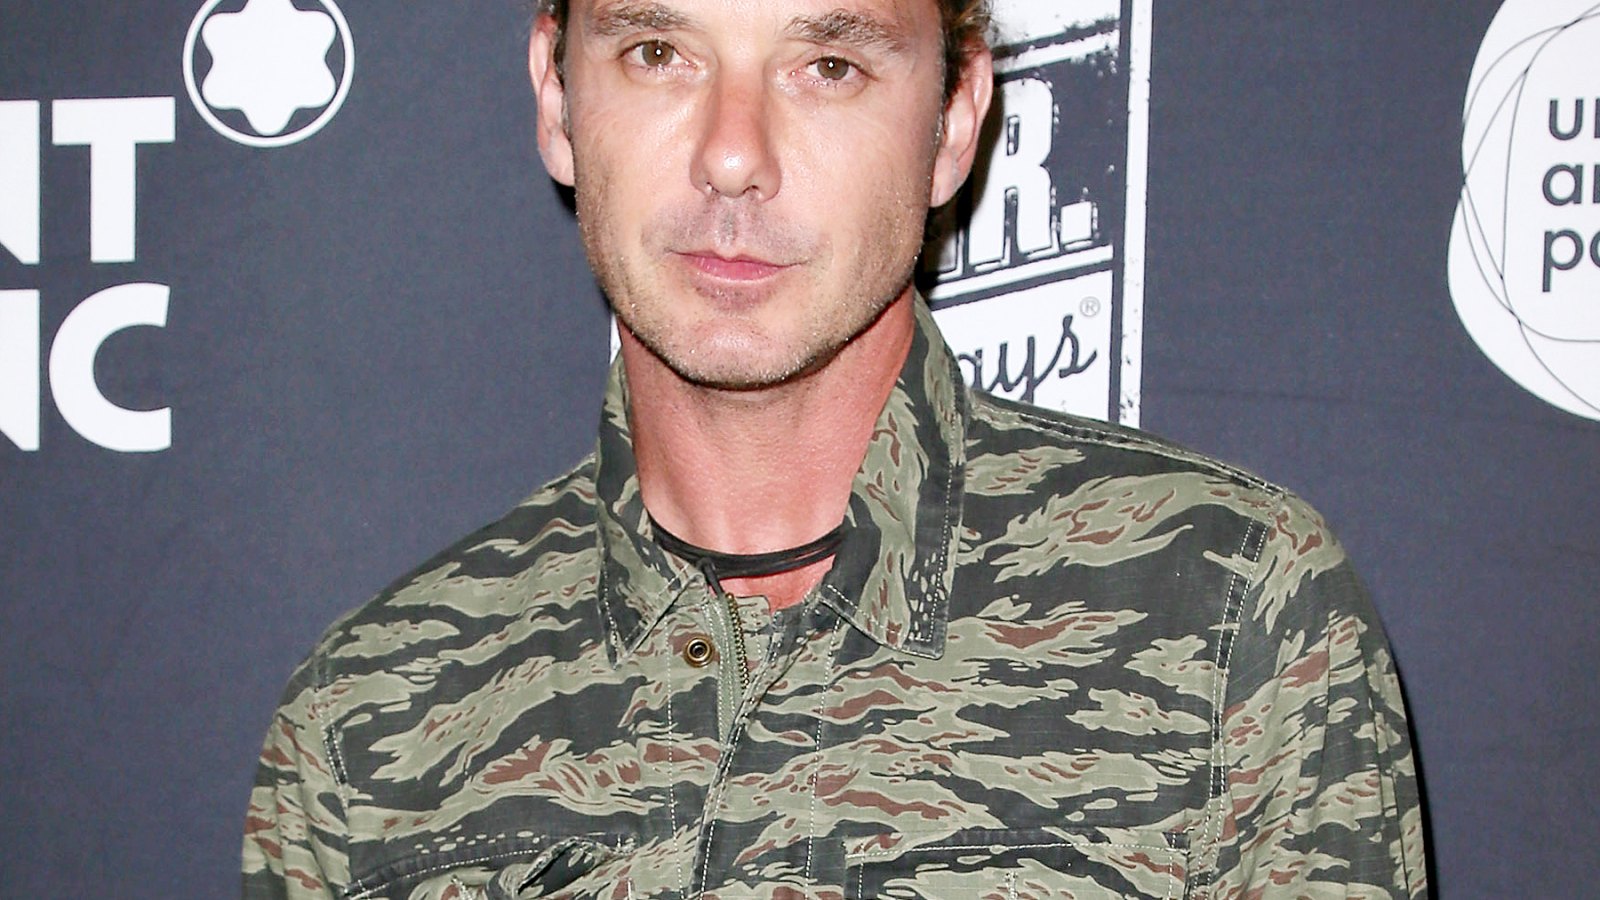 Gavin Rossdale attends an event on June 20, 2014